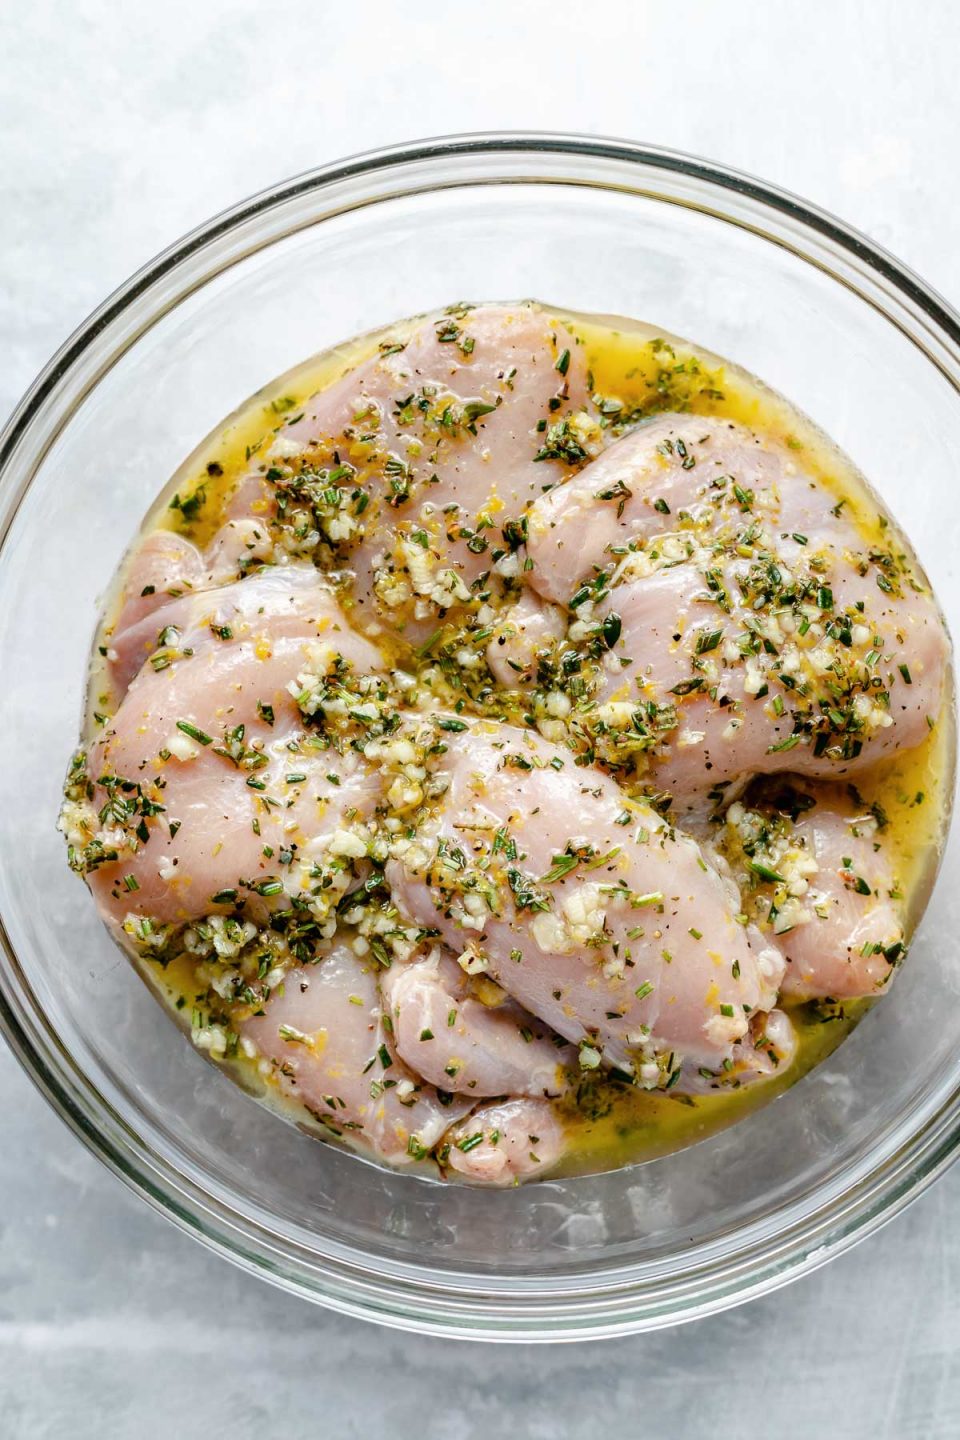 Chicken thighs in a large glass mixing bowl, marinating in Lemon Herb marinade. The bowl sits atop a light blue surface.